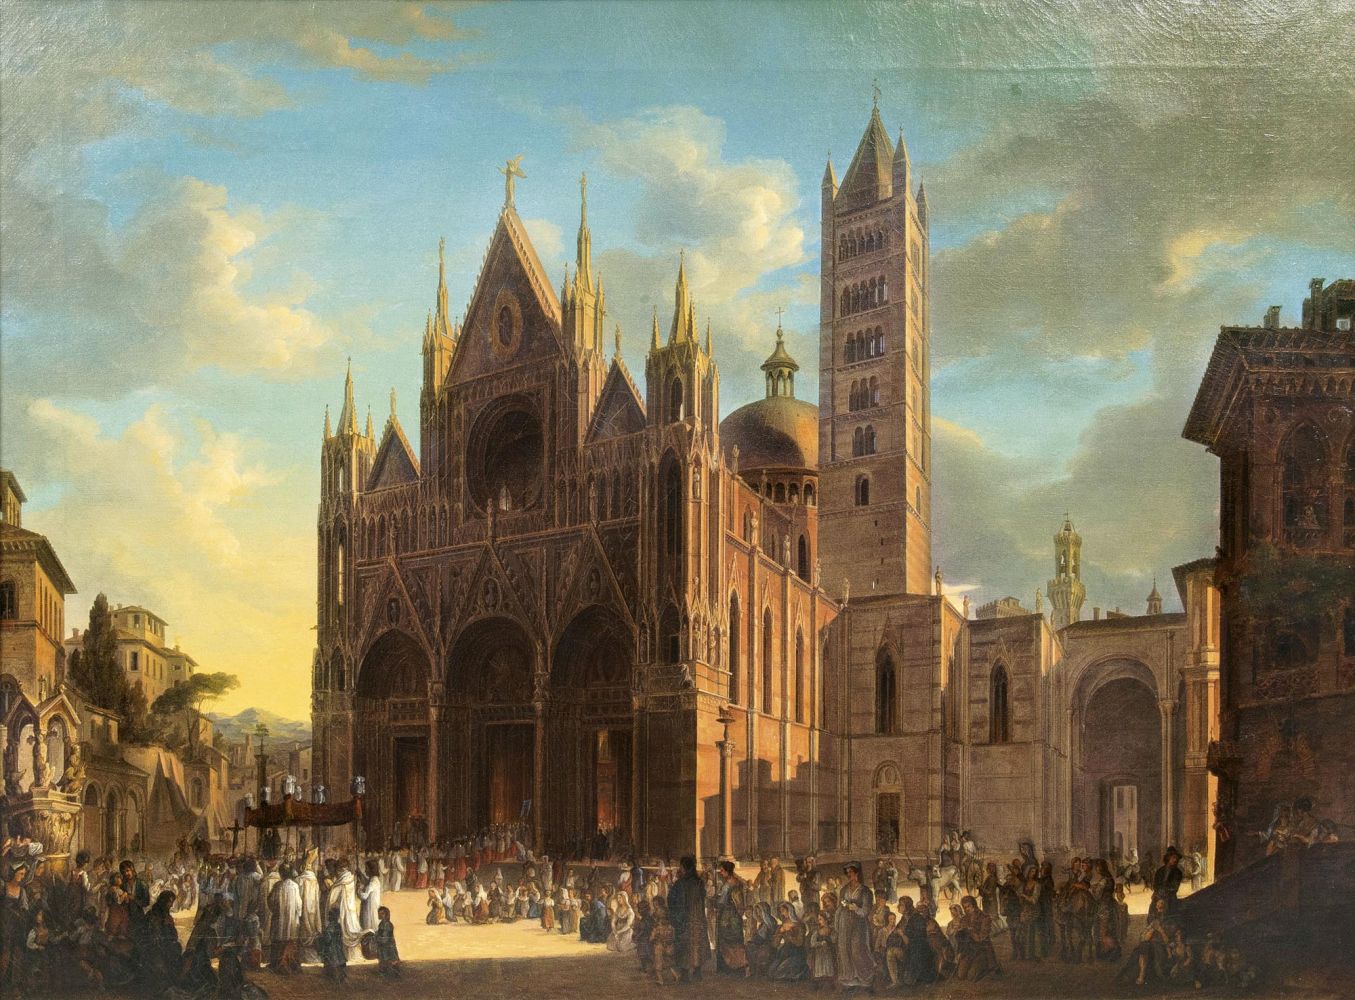 Procession in front of the Siena Cathedral